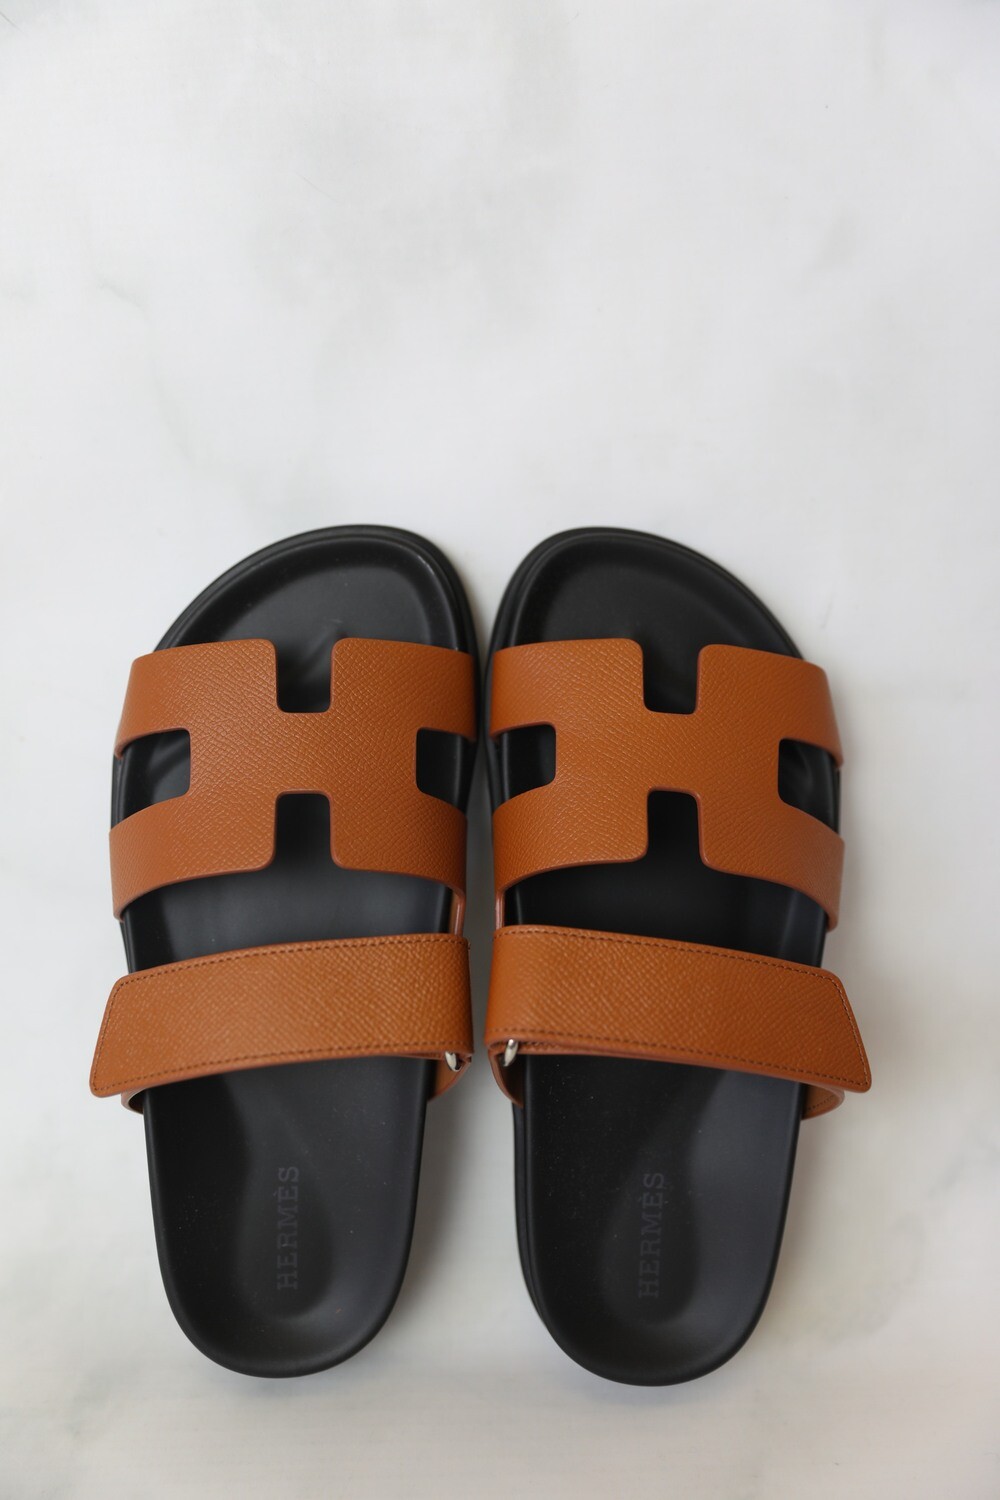 Hermes Chypre Sandals, Gold Tan Brown Leather, Size 36.5, New in Box WA001